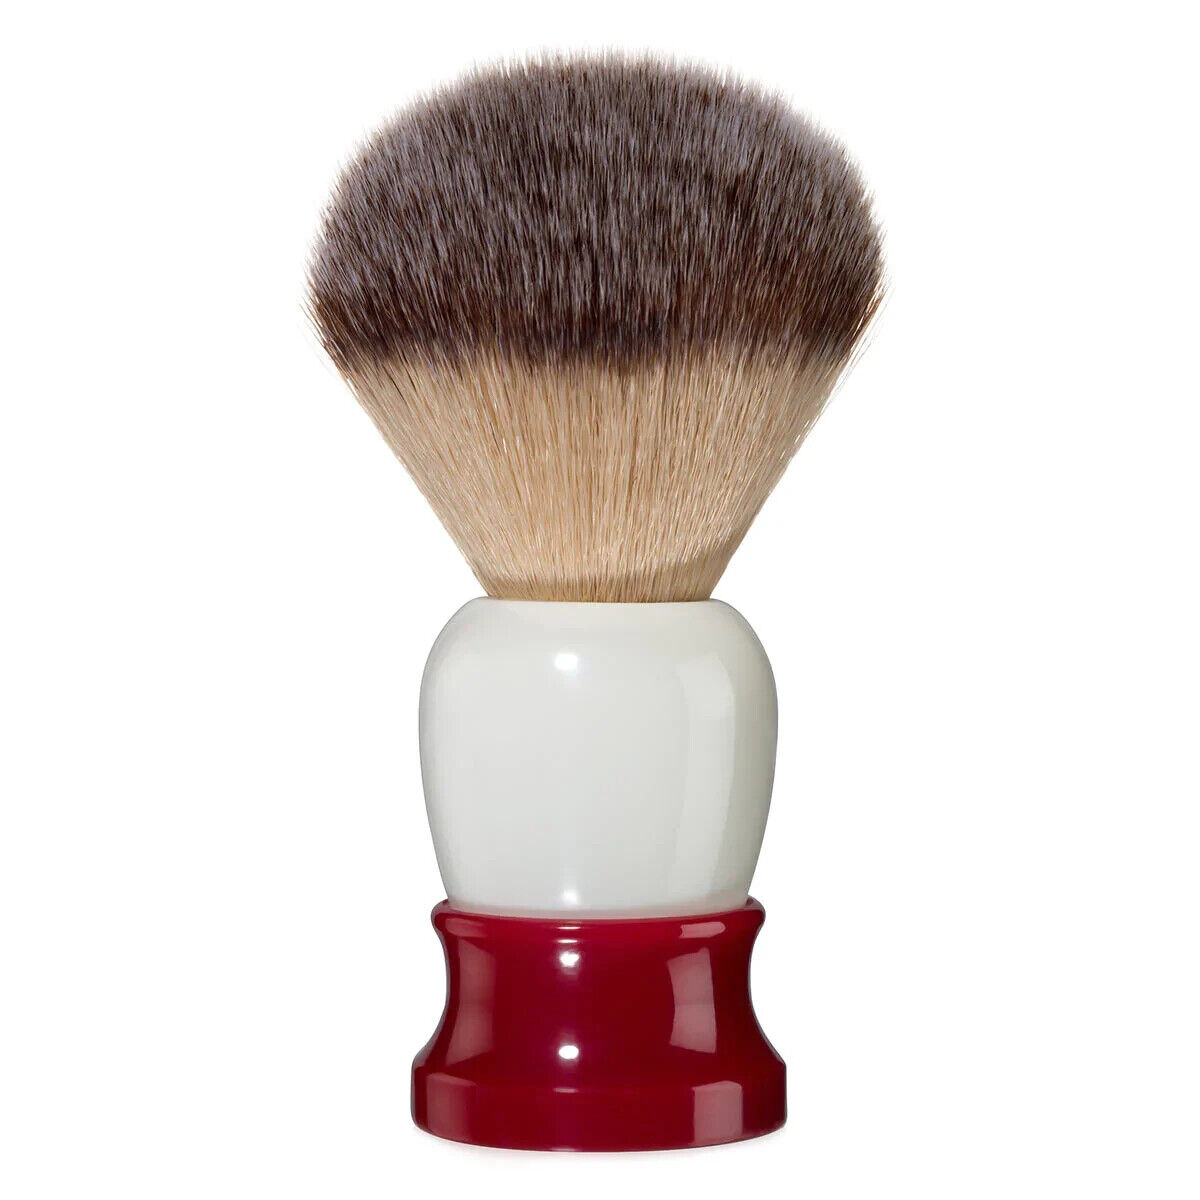 Fine Accoutrements Classic Shave Brush Red/white  New - Open Box